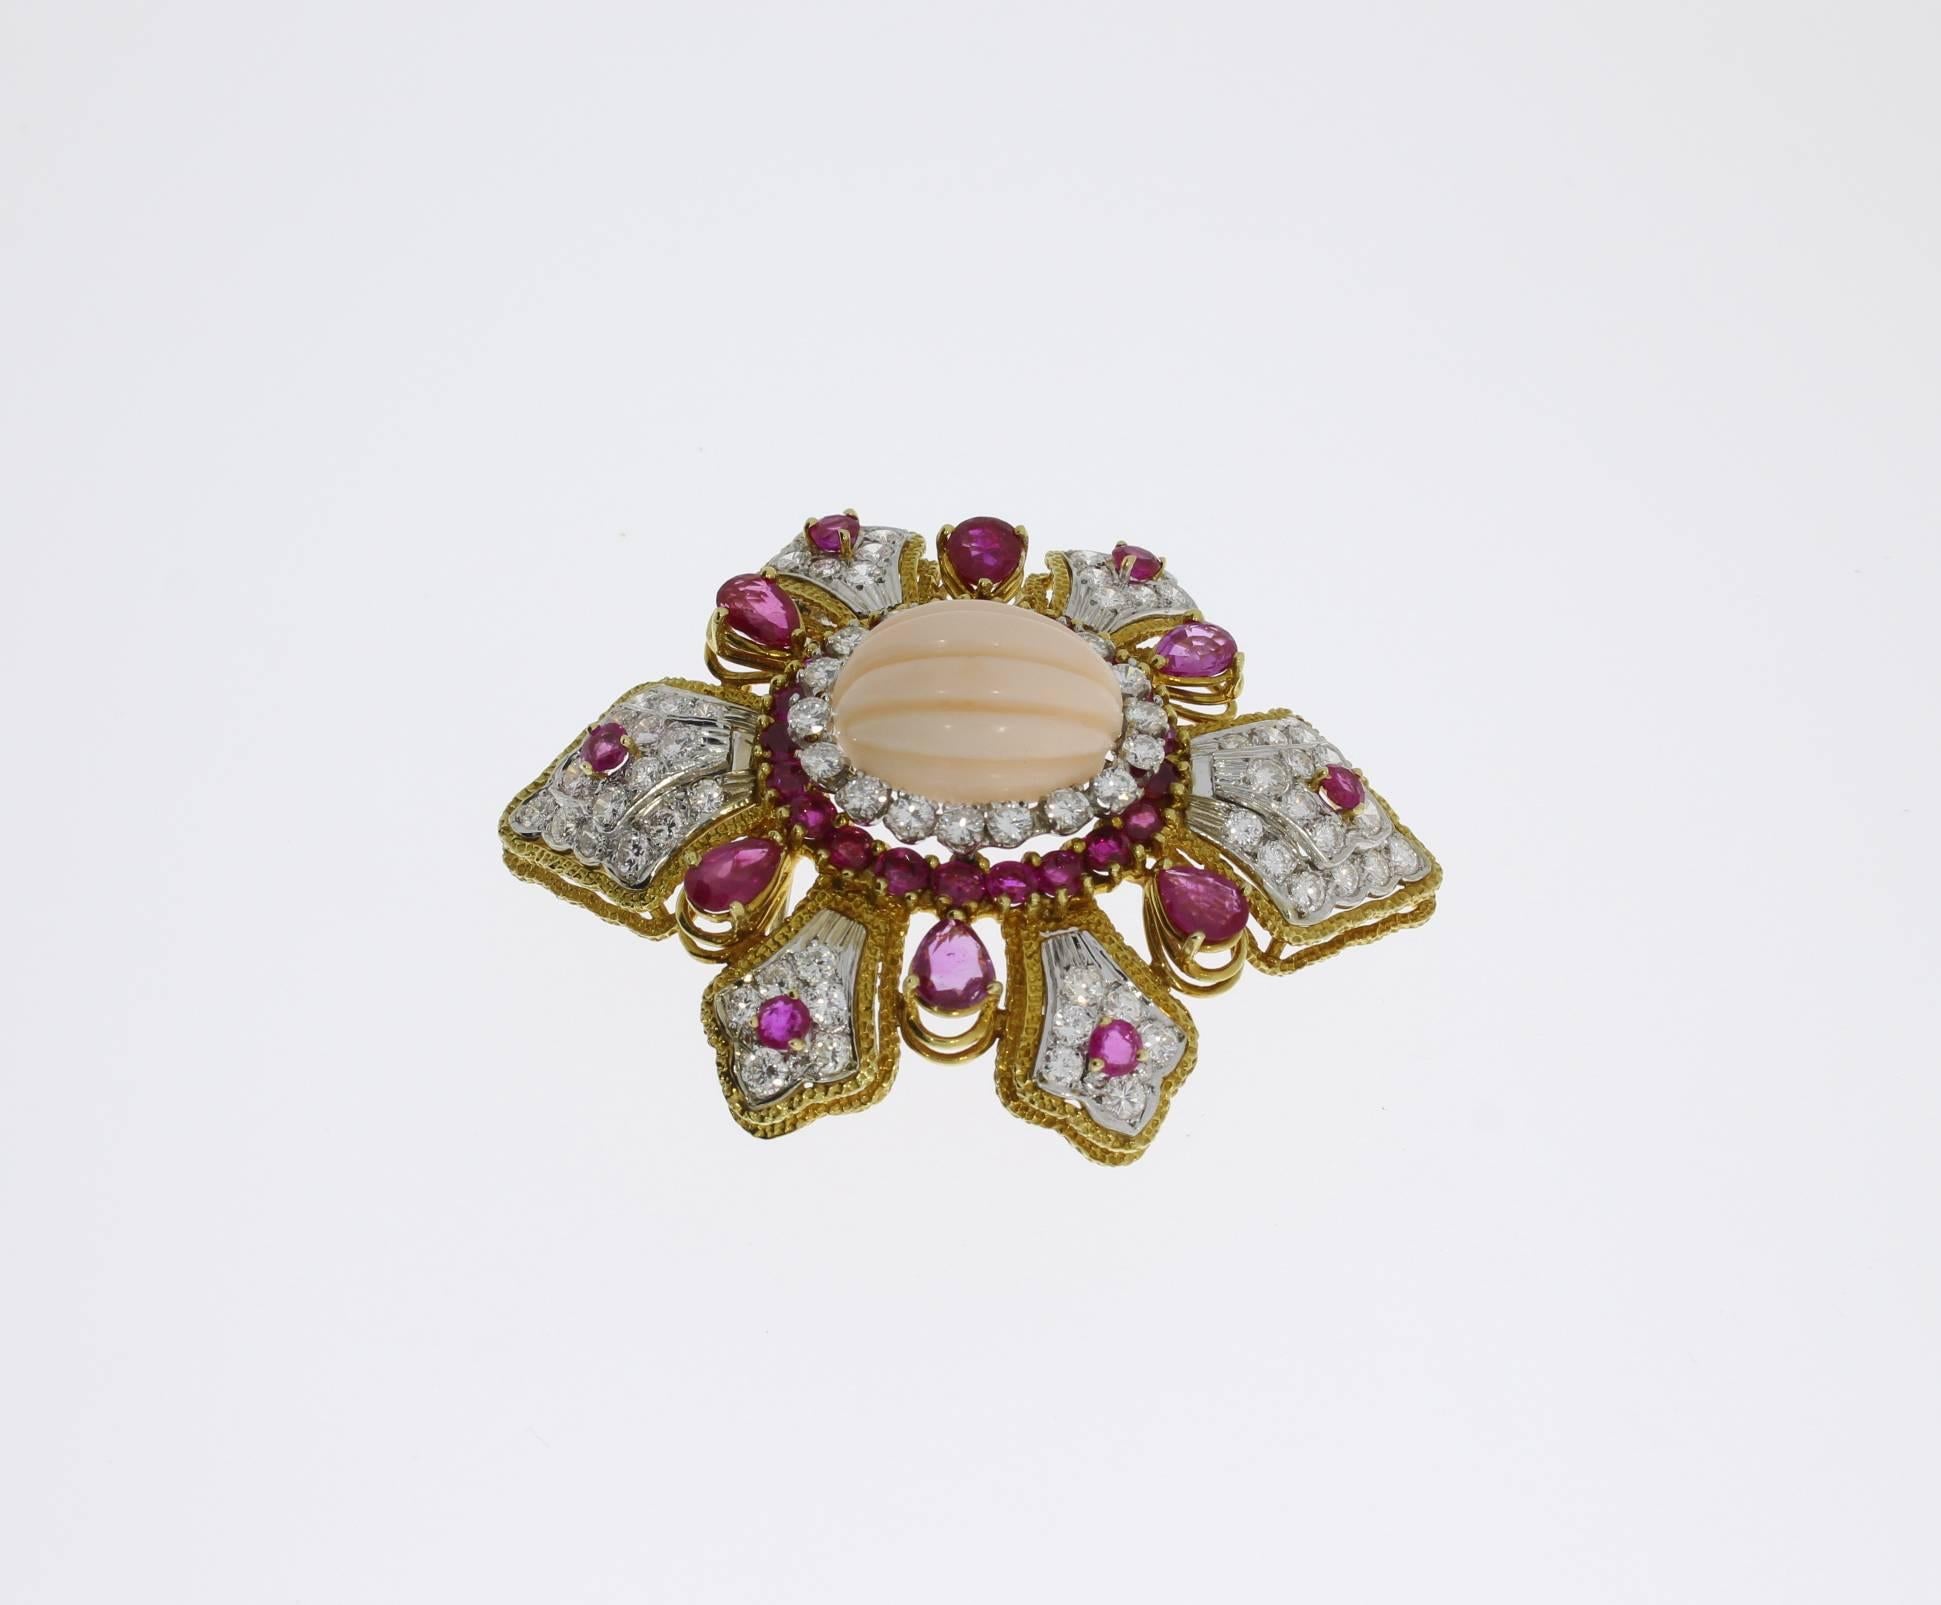 1960s-1970s. Cabochon-cut carved coral, 76 brilliant-cut diamonds weighing approximately 5,30 ct., 32 rubies weighing circa 8.70 ct. Mounted in 18 K yellow gold. Hallmarked with the fineness 750. Total weight: 32,30 g. 
Diameter: 1.77 in ( 4,5 cm )